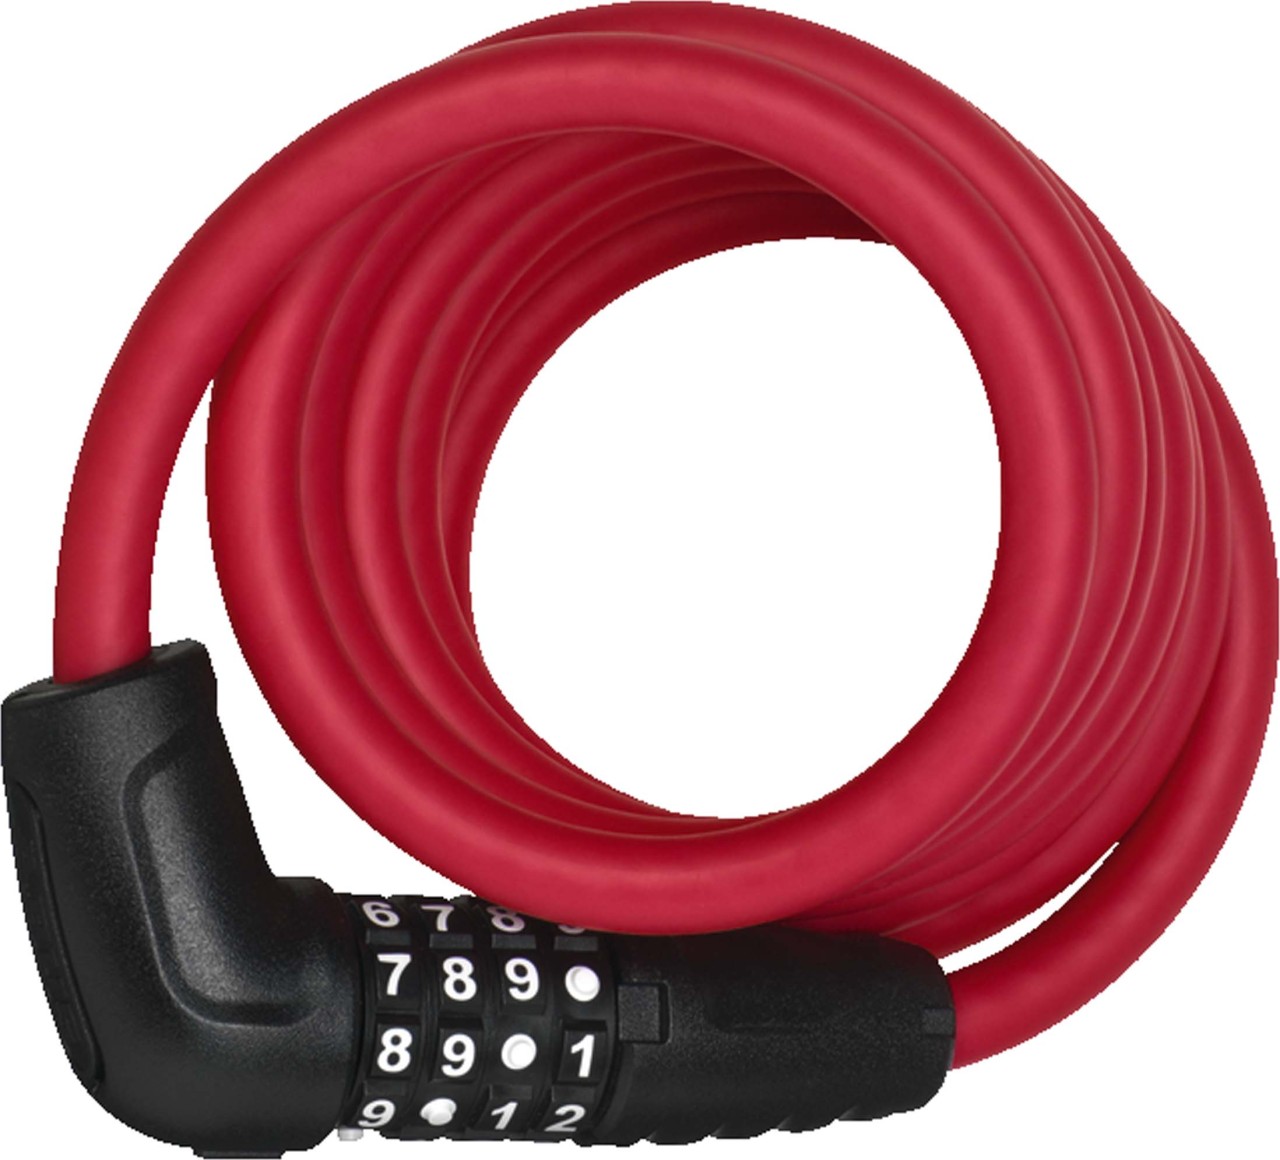 Abus Spiral cable lock Numero 5510 Combo Color red